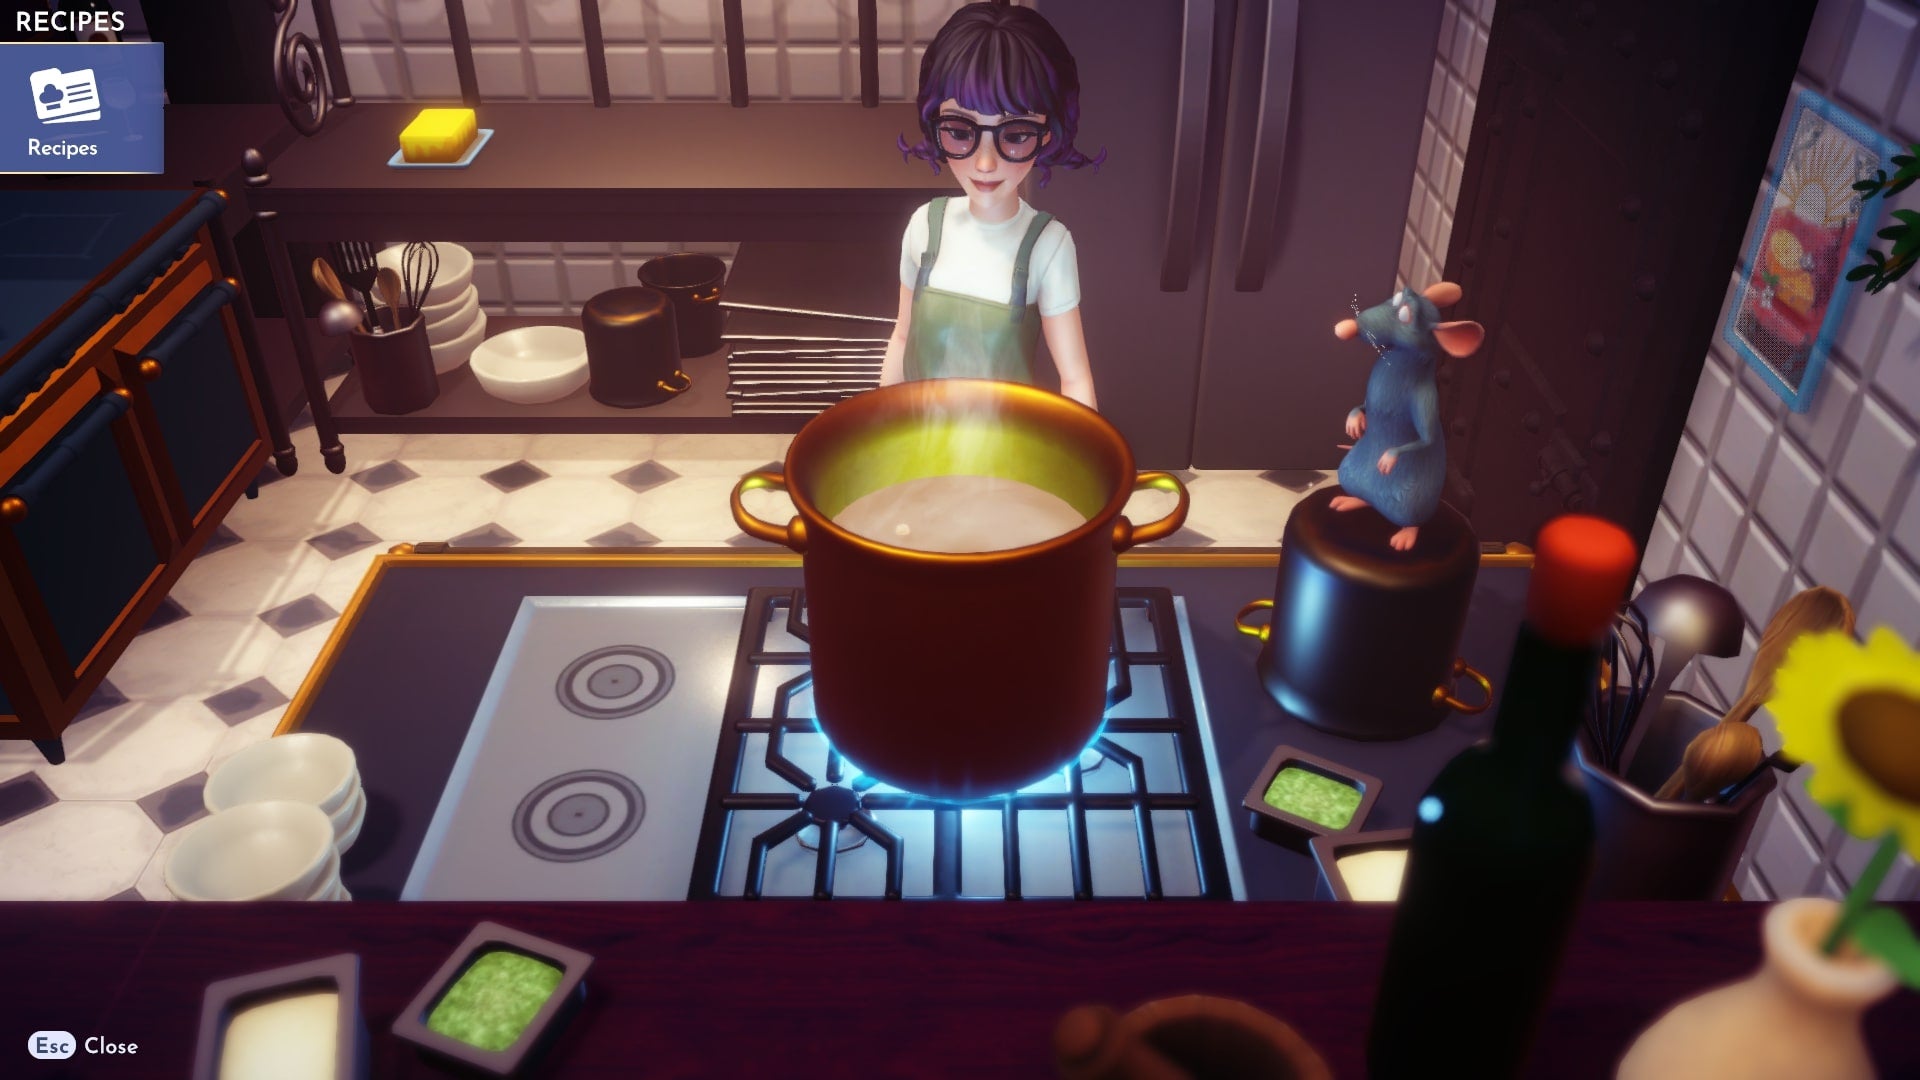 A player prepares a meal next to Remy at Chez Remy in Disney Dreamlight Valley